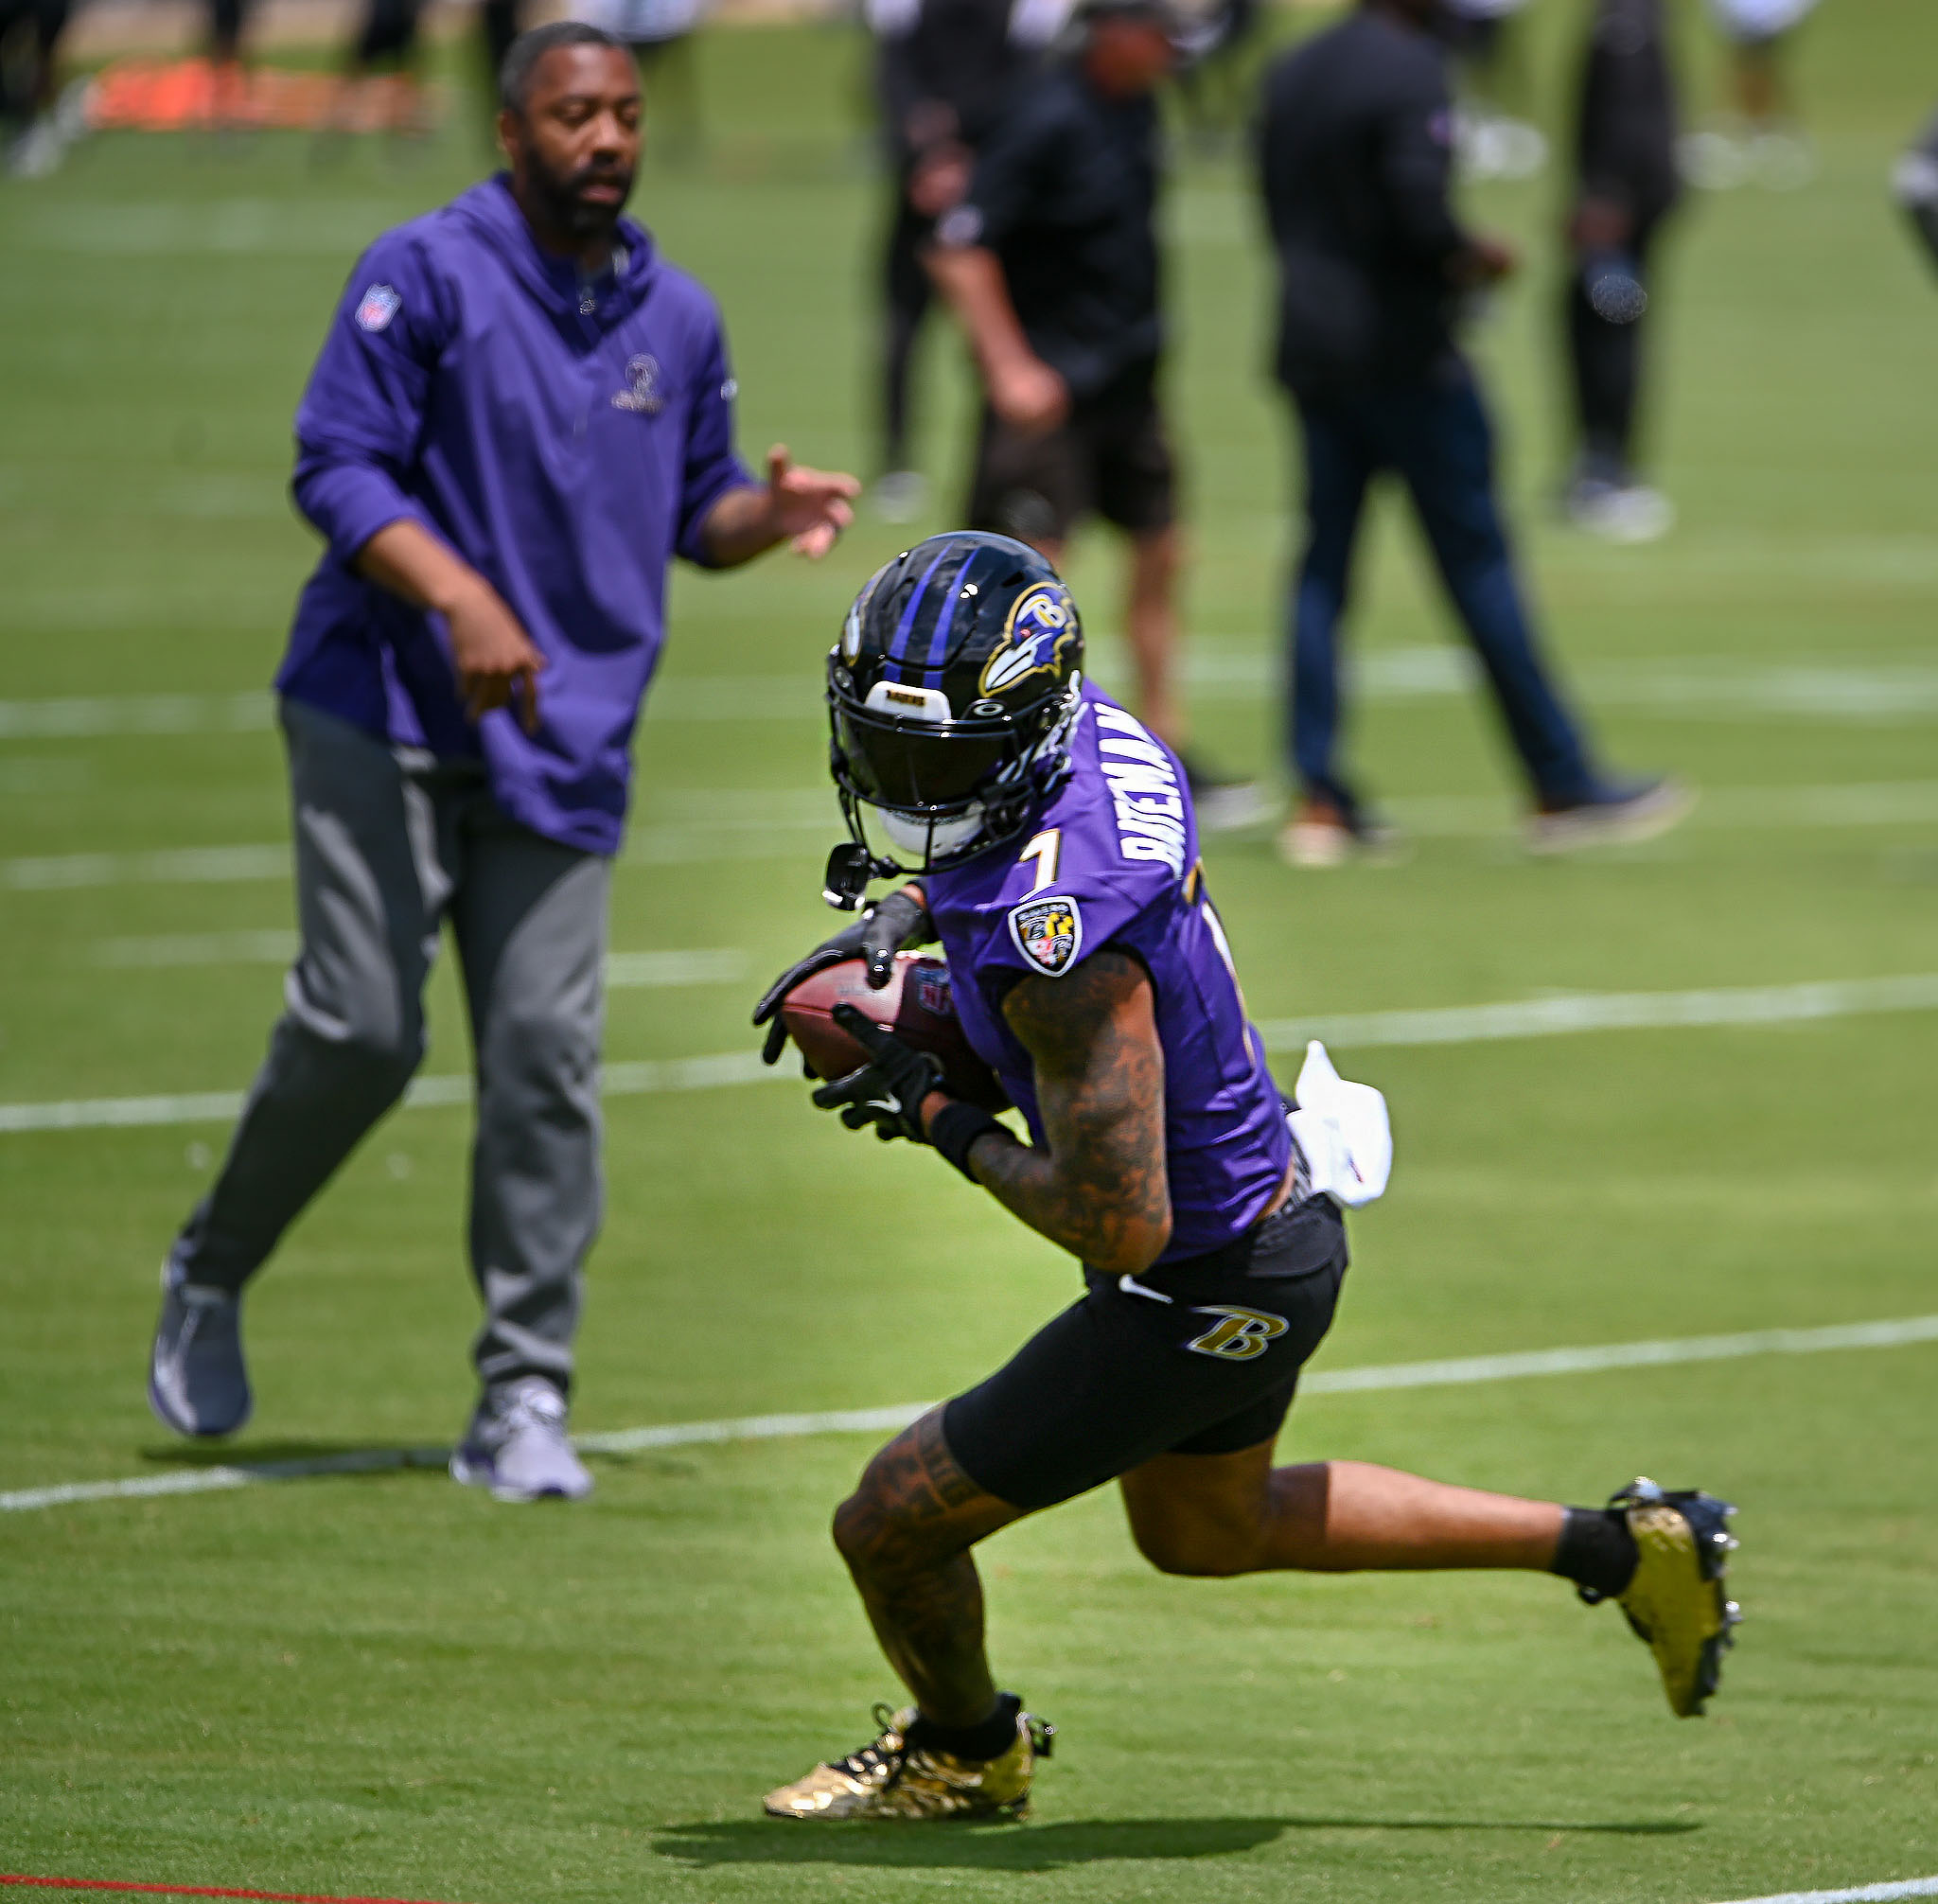 Baltimore Ravens wide receiver Rashod Bateman catches a pass during mandatory minicamp practice in Owings Mills, Md. (Kevin Richardson/Staff)